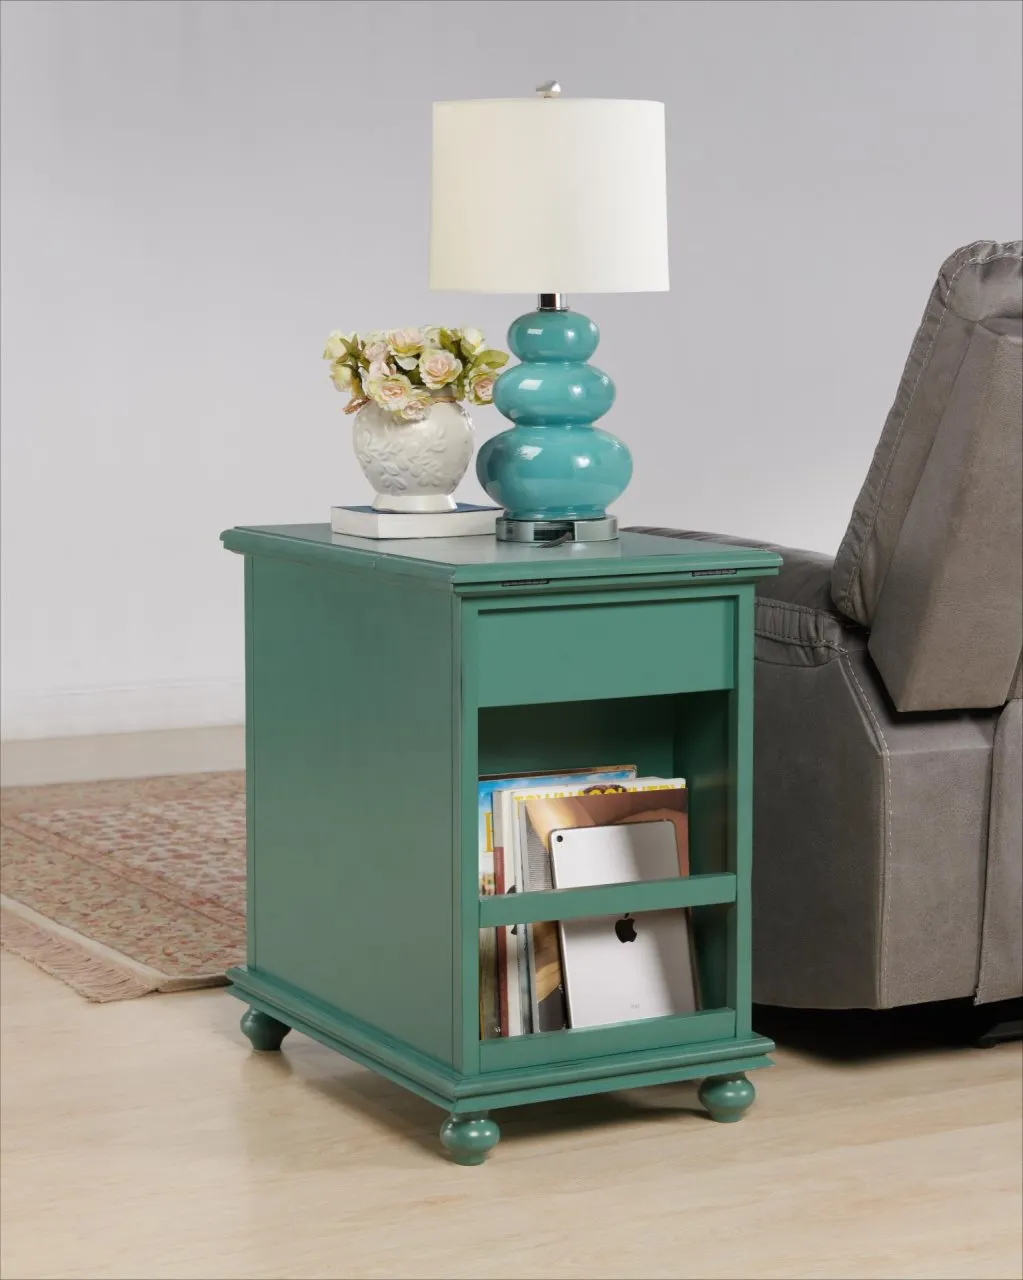 ELEGANT CHAIRSIDE ACCENT TABLE WITH POWER IN ANTIQUE TEAL